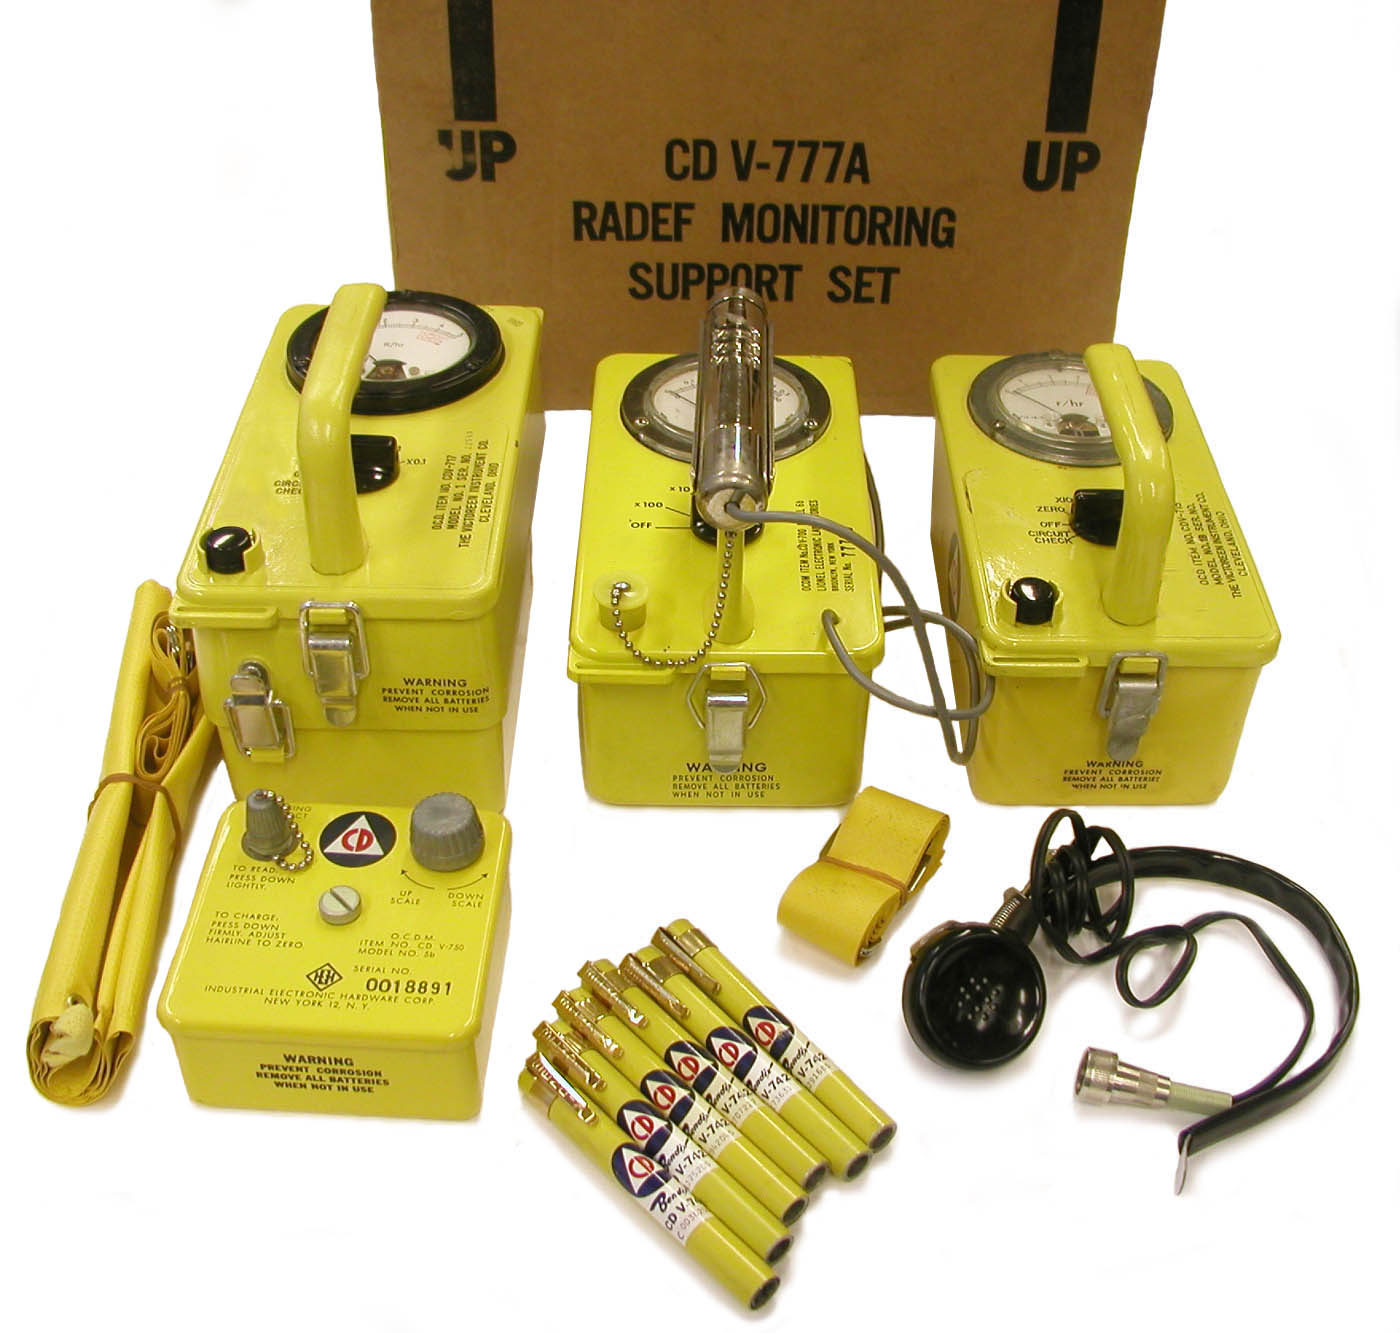 CD V-777A Kit for Surface Monitoring and Reporting Stations